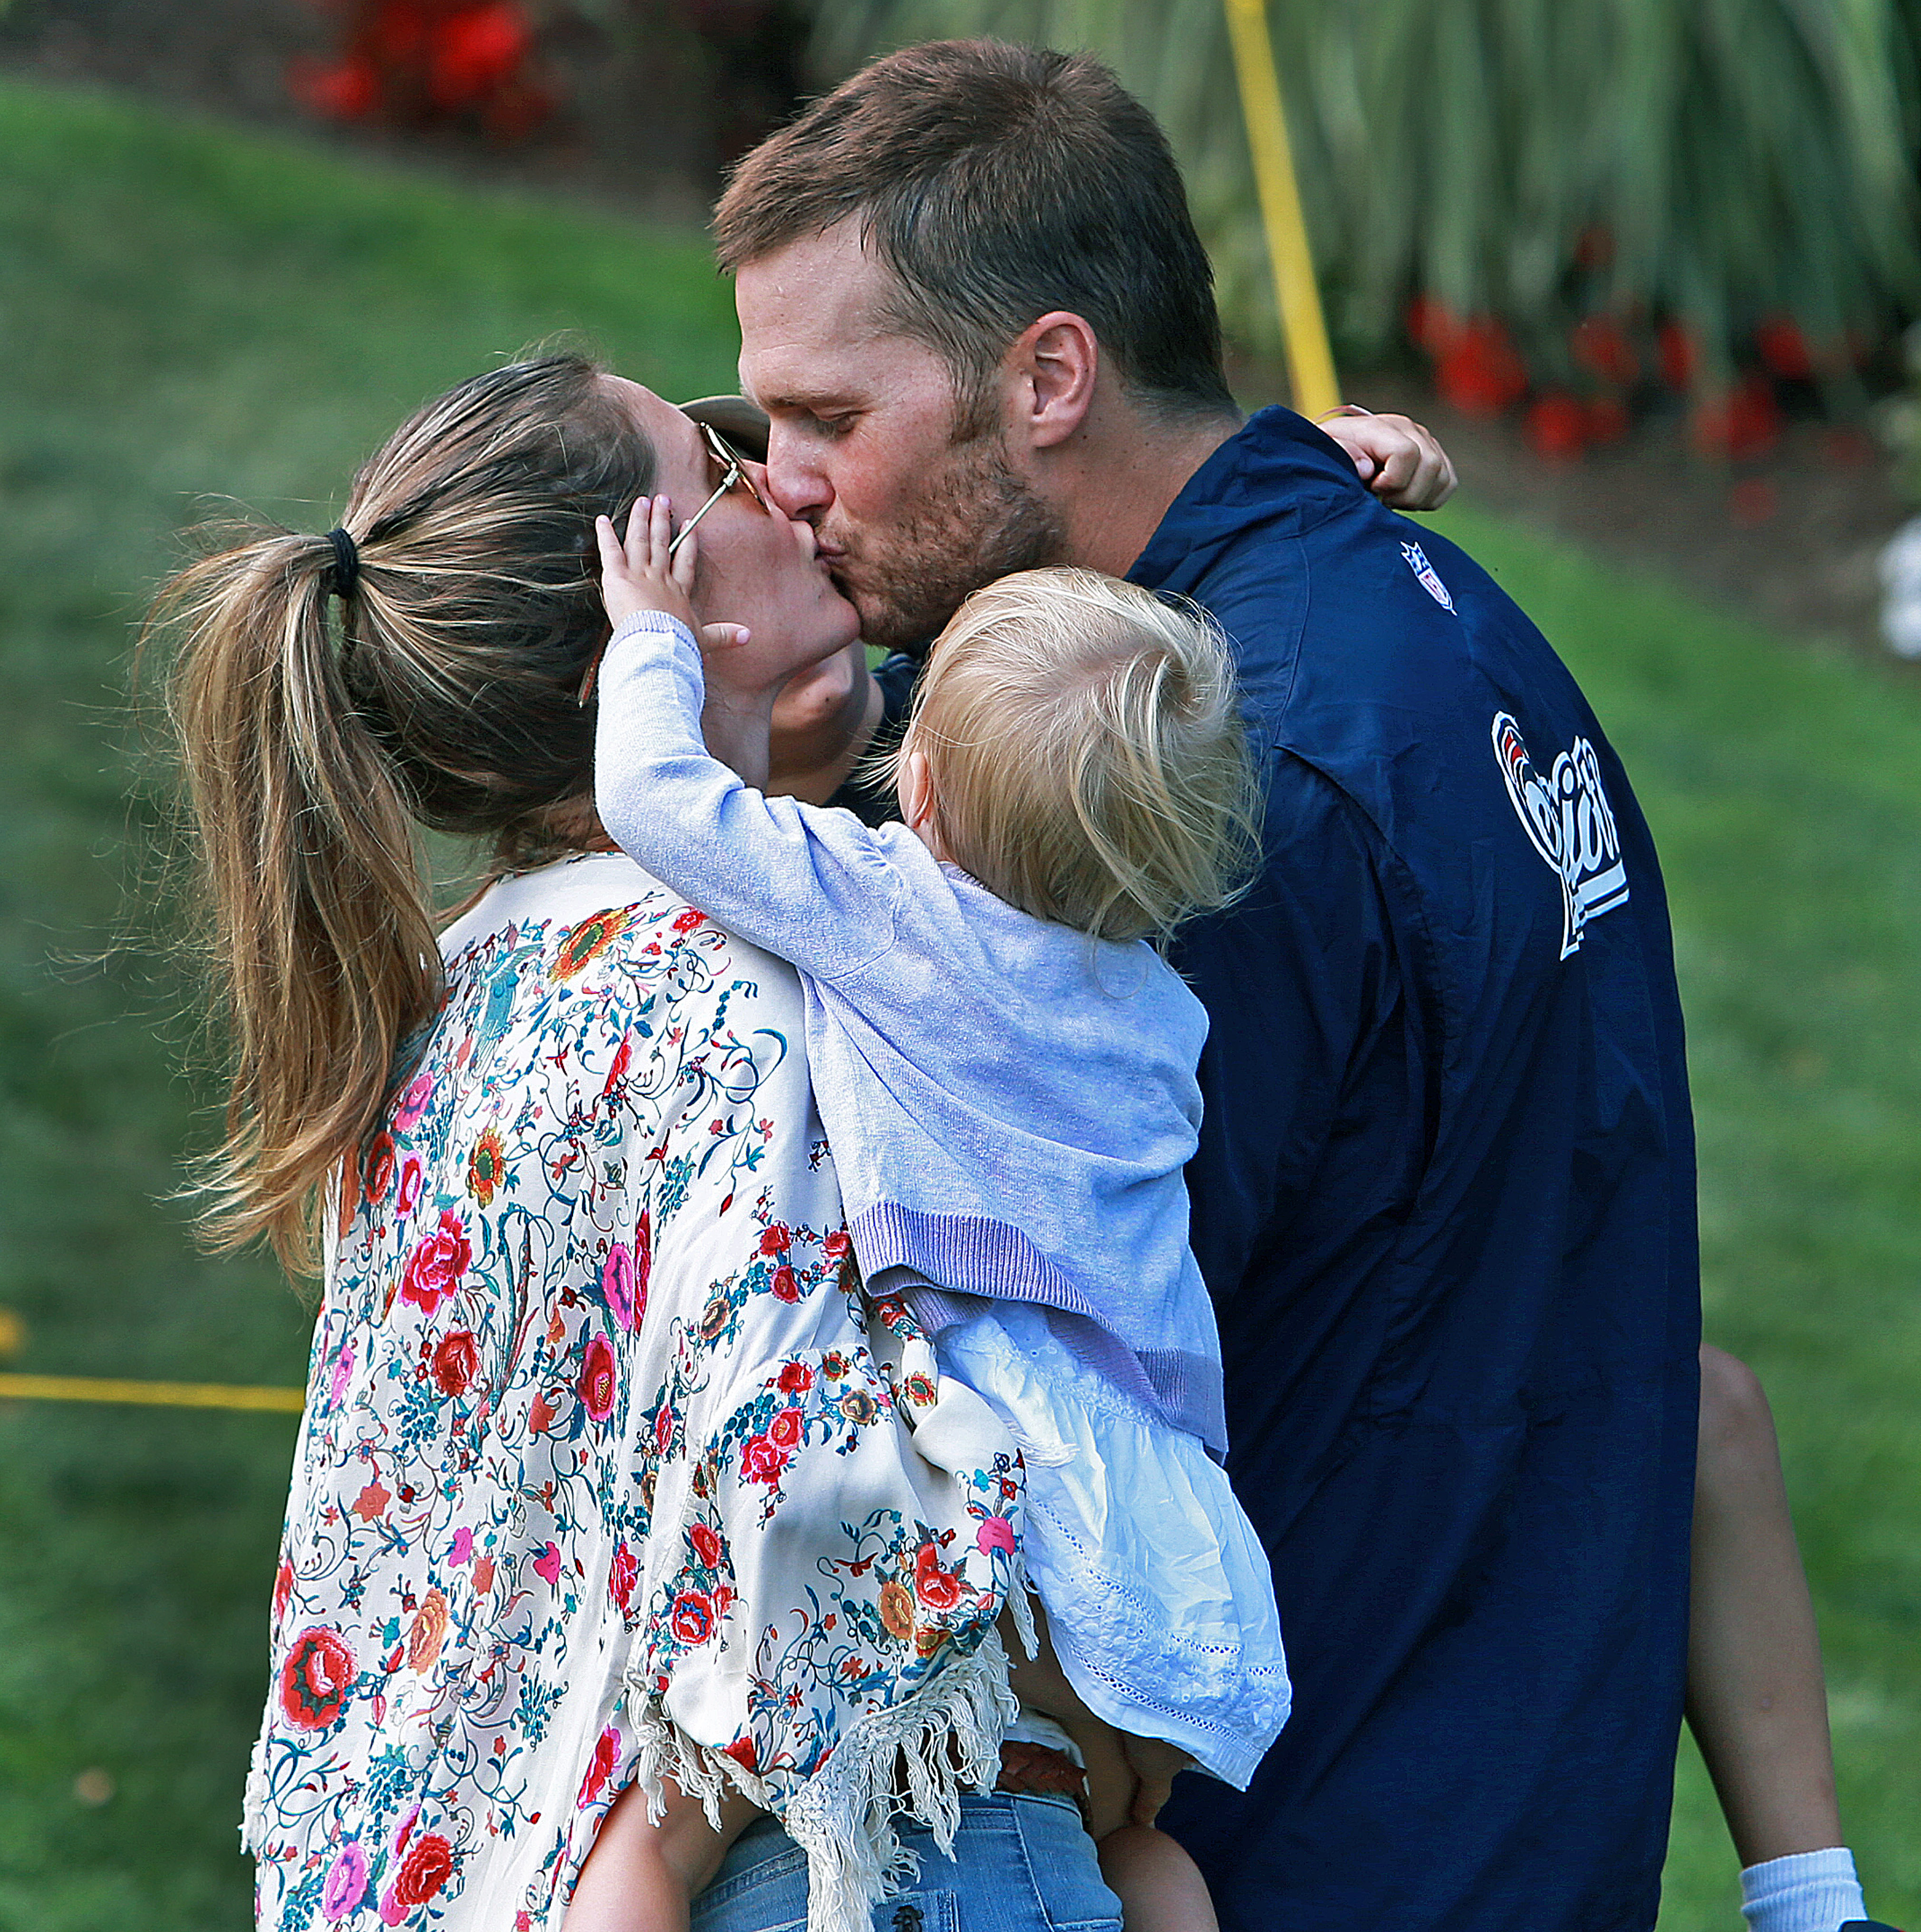 Tom Brady, Gisele Bundchen and their daughter at the fields of Gillette Stadium on August 11, 2014 | Source: Getty Images